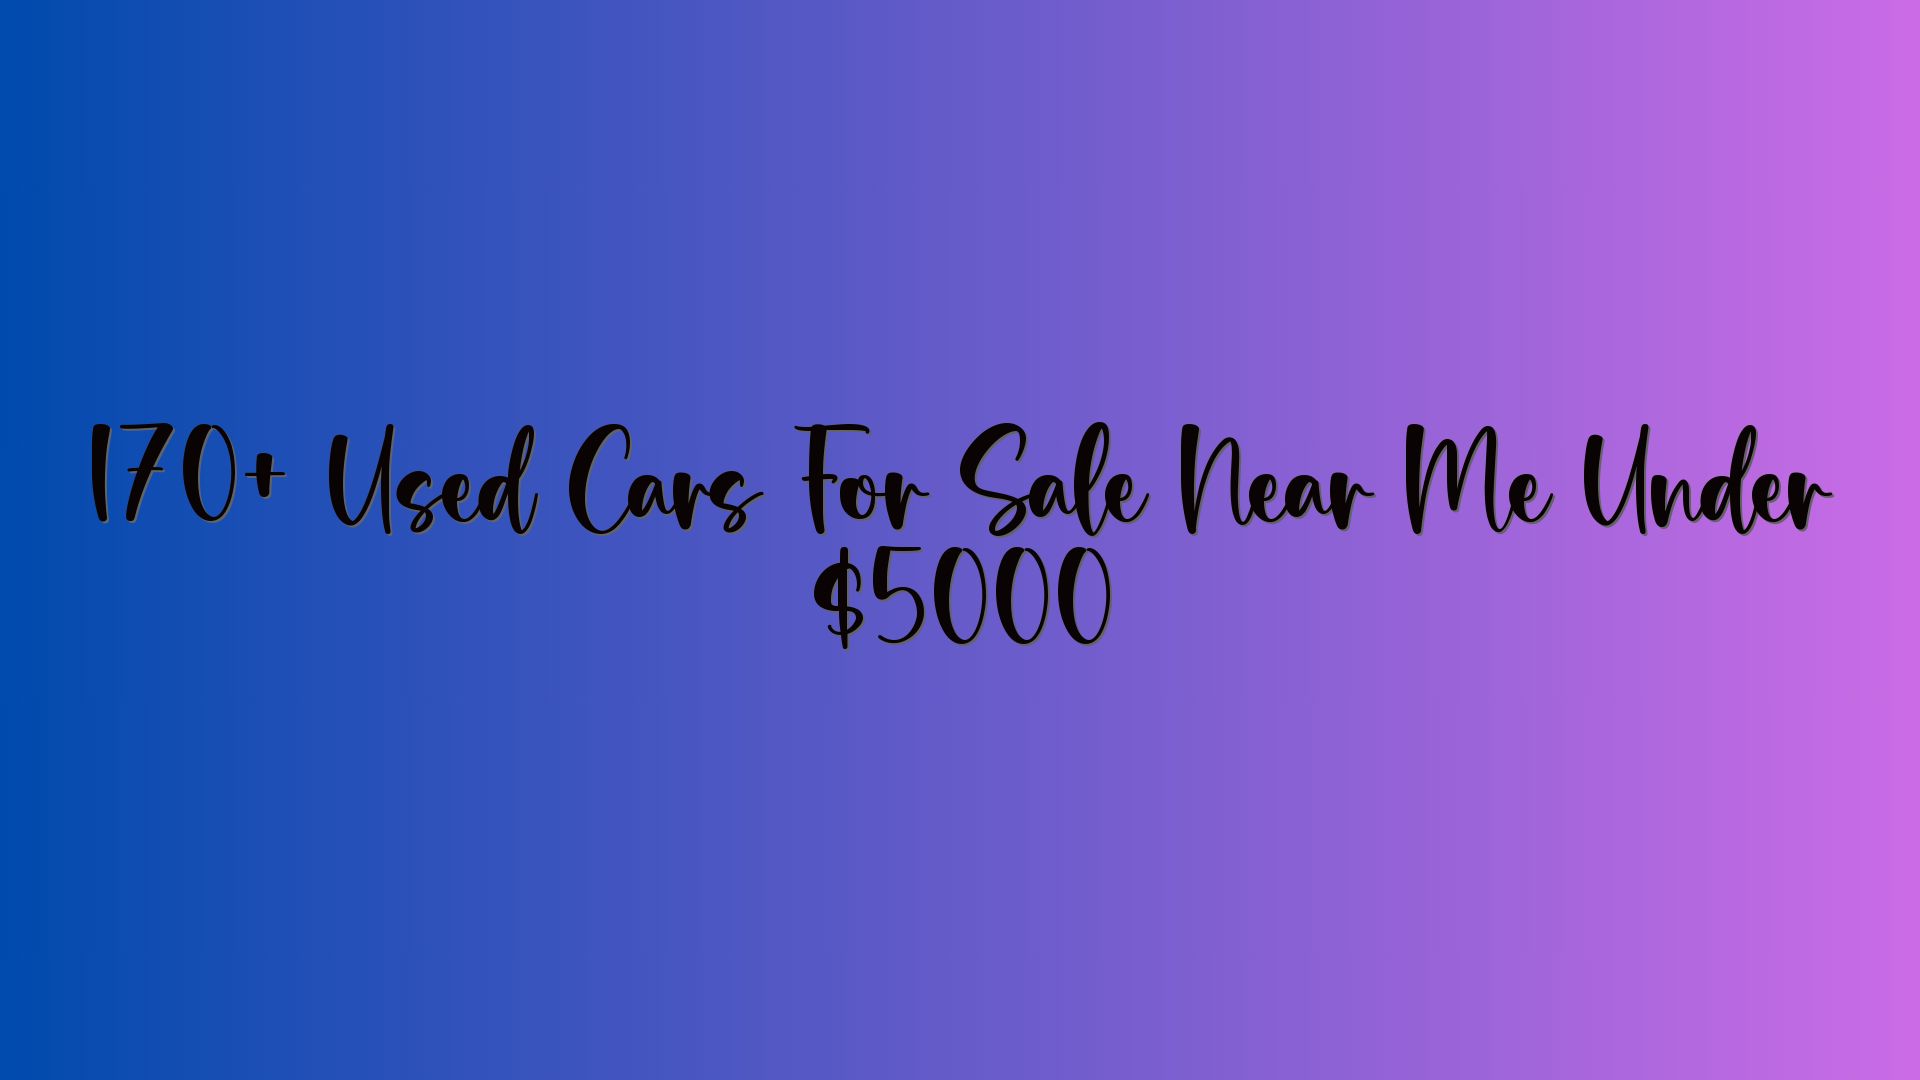 170+ Used Cars For Sale Near Me Under $5000